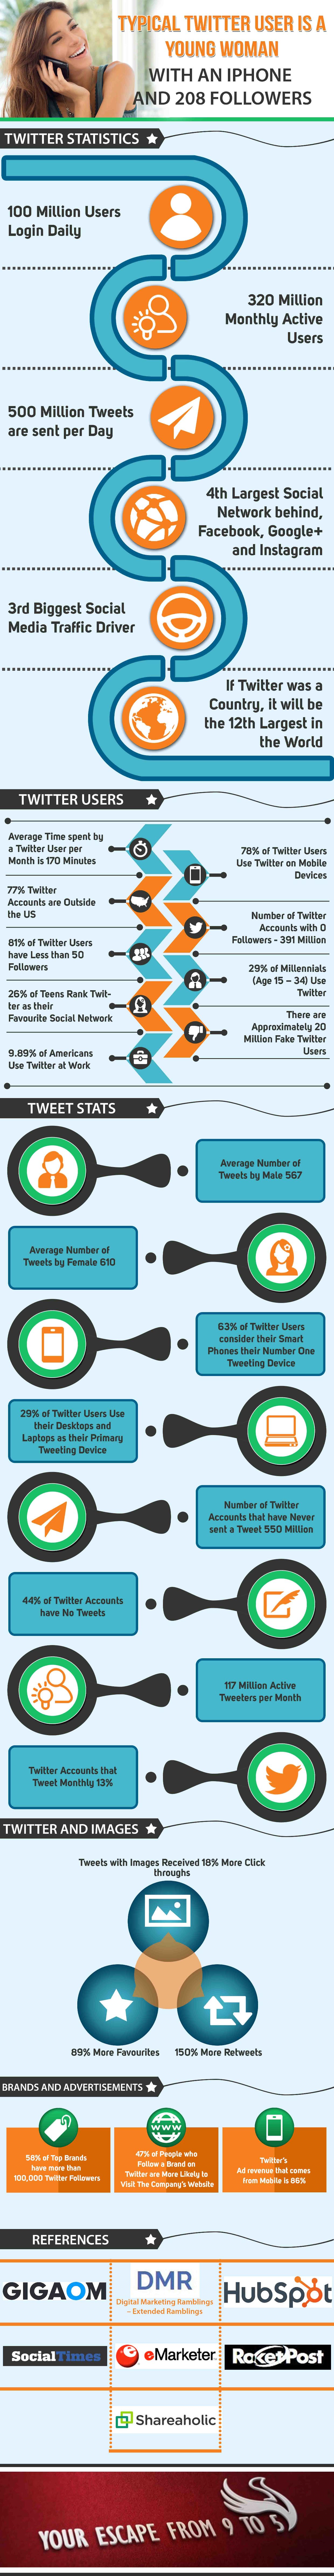 marketers must understand twitter audience for brand promotions